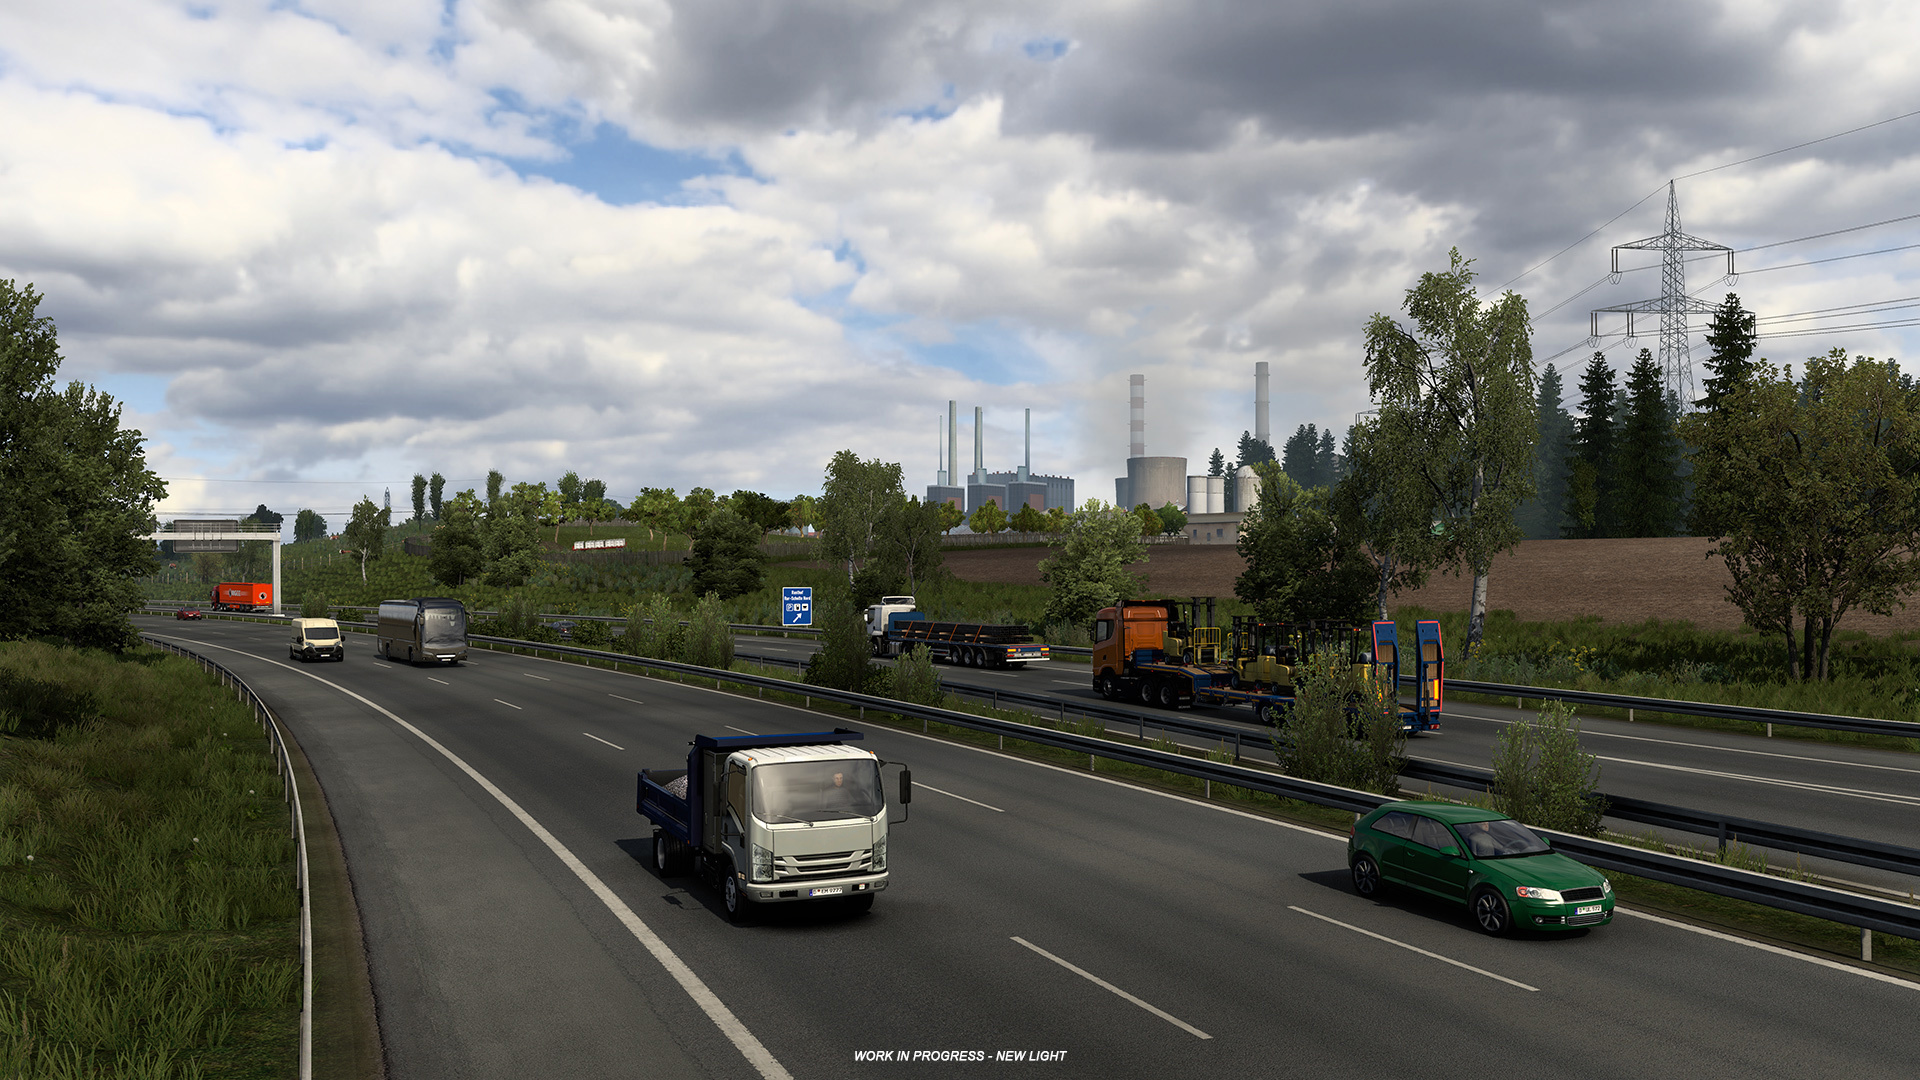 Euro Truck Simulator 2 - Convoy on the Horizon, Get Ready to Join! - Steam  News